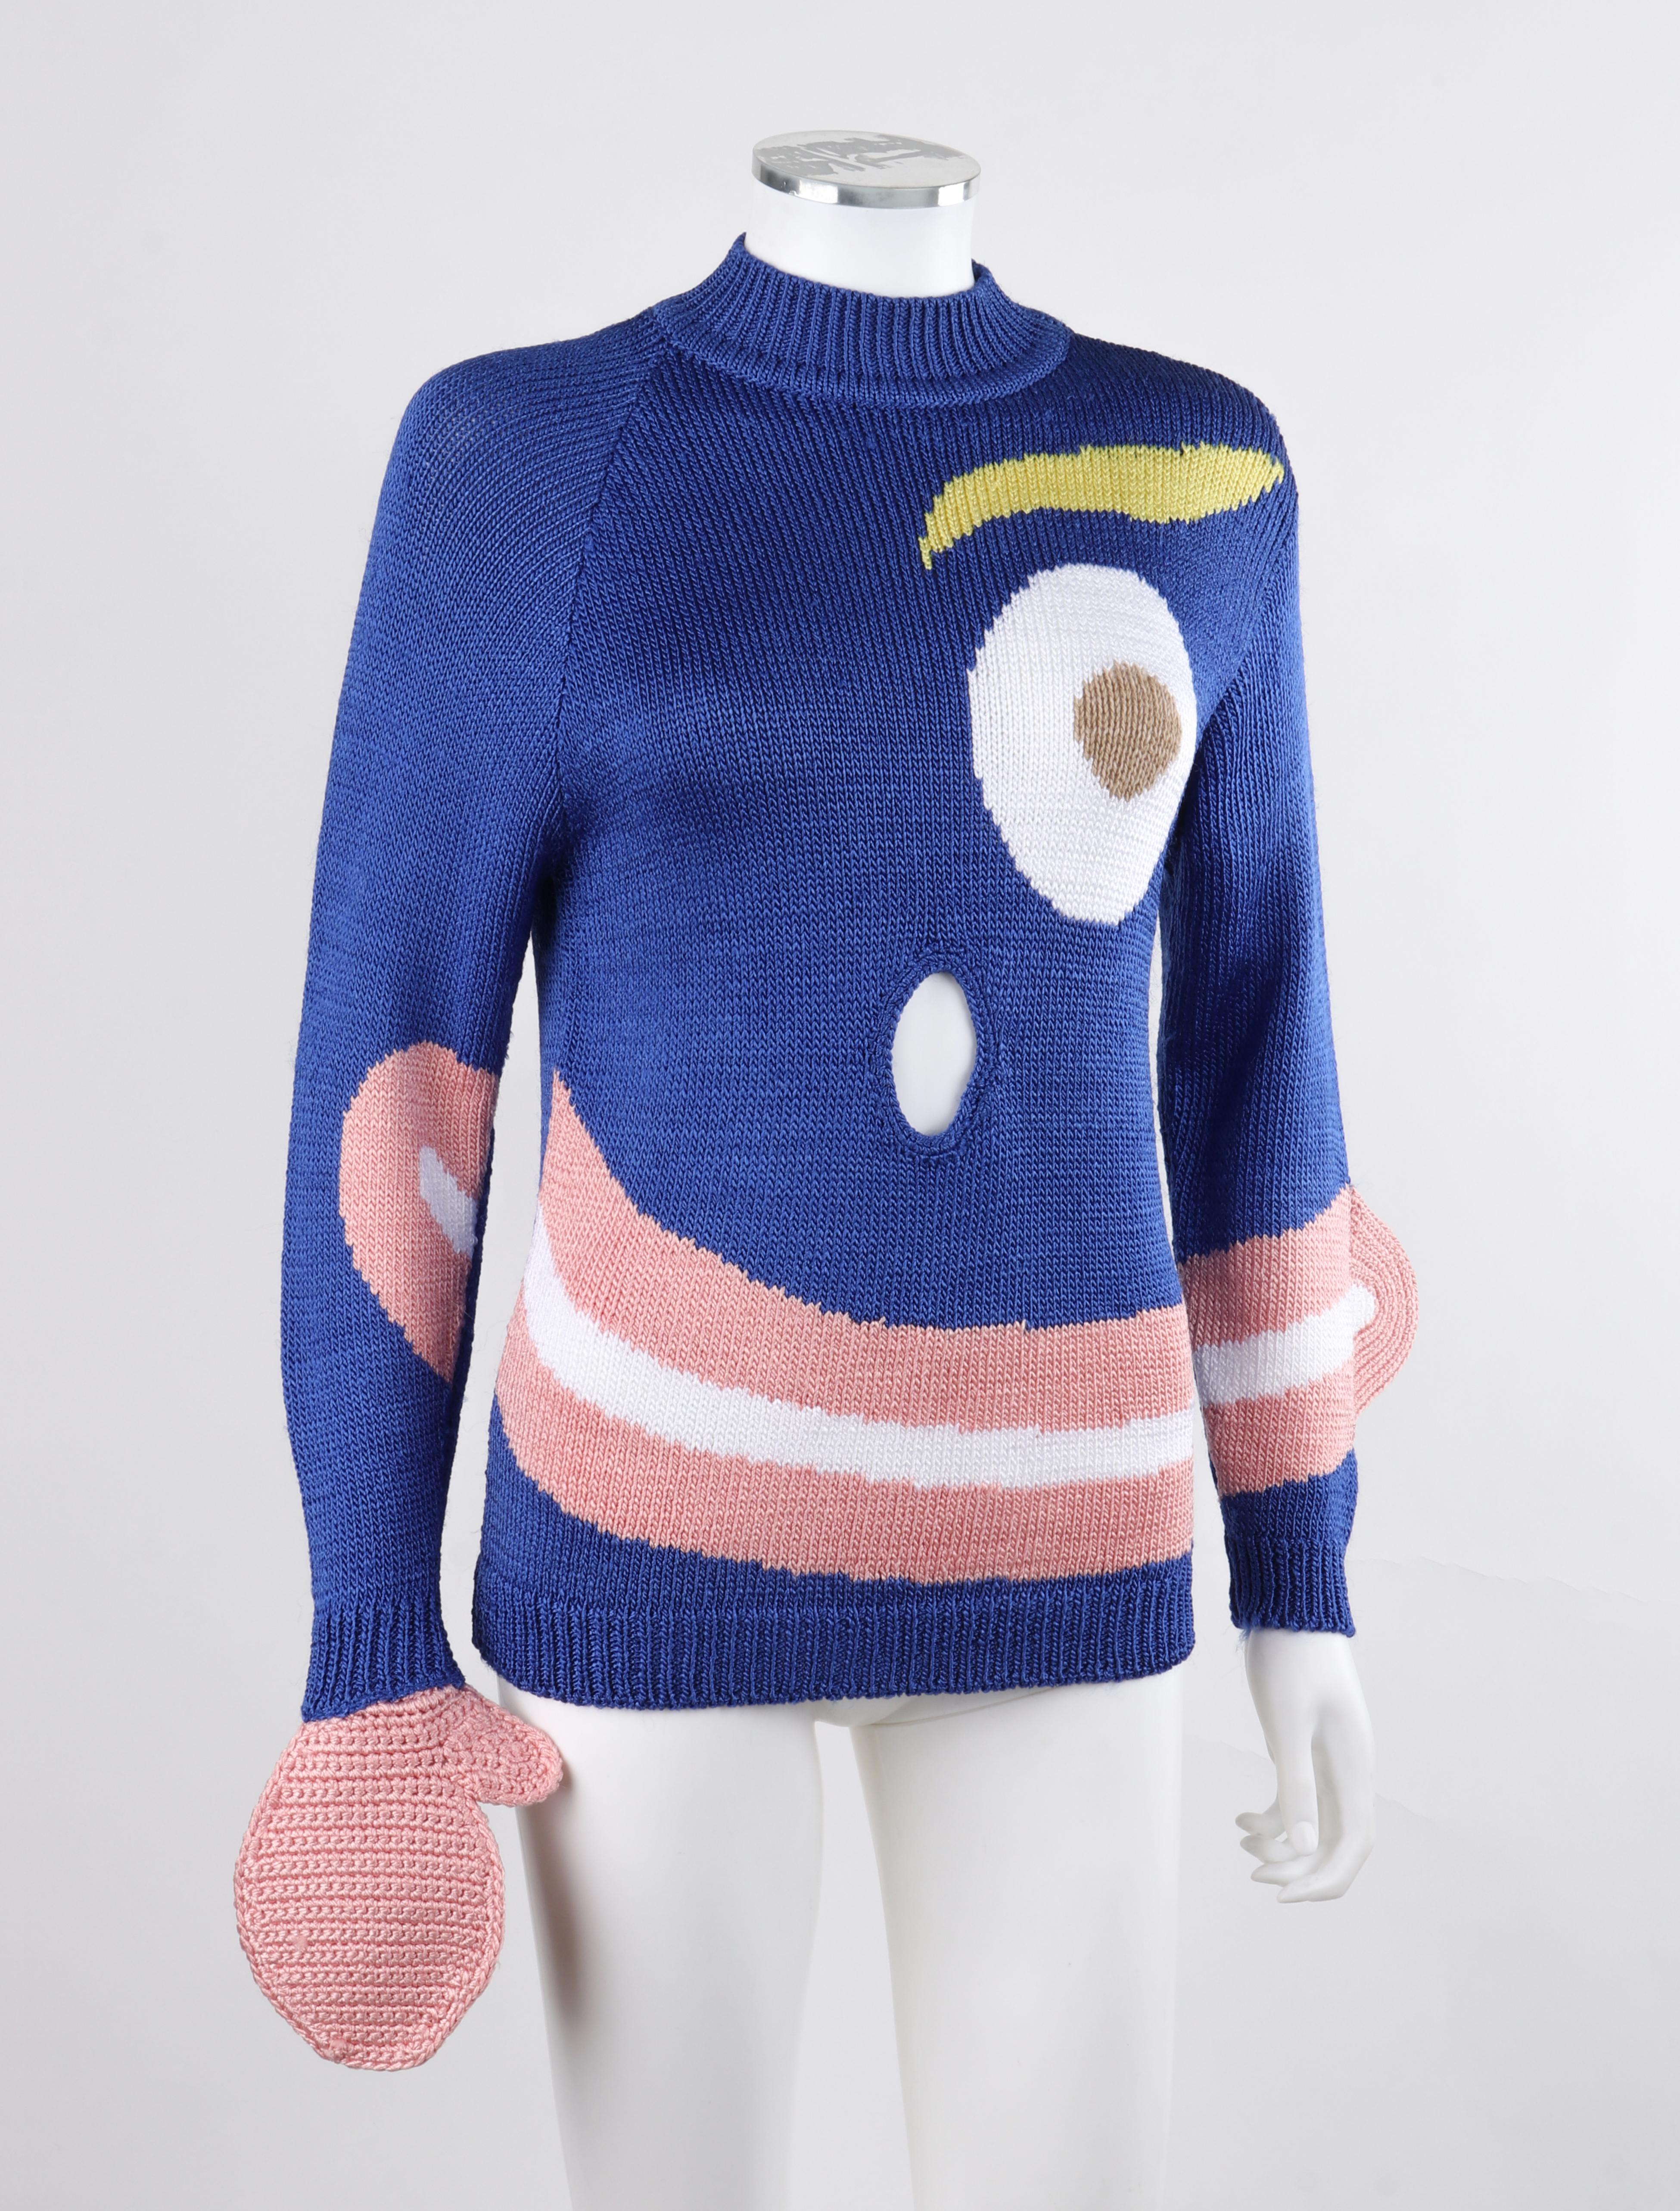 SURVIVAL OF THE FASHIONEST S/S 2020 Blue Knit Smiley Face Pullover Sweater Top S For Sale 1